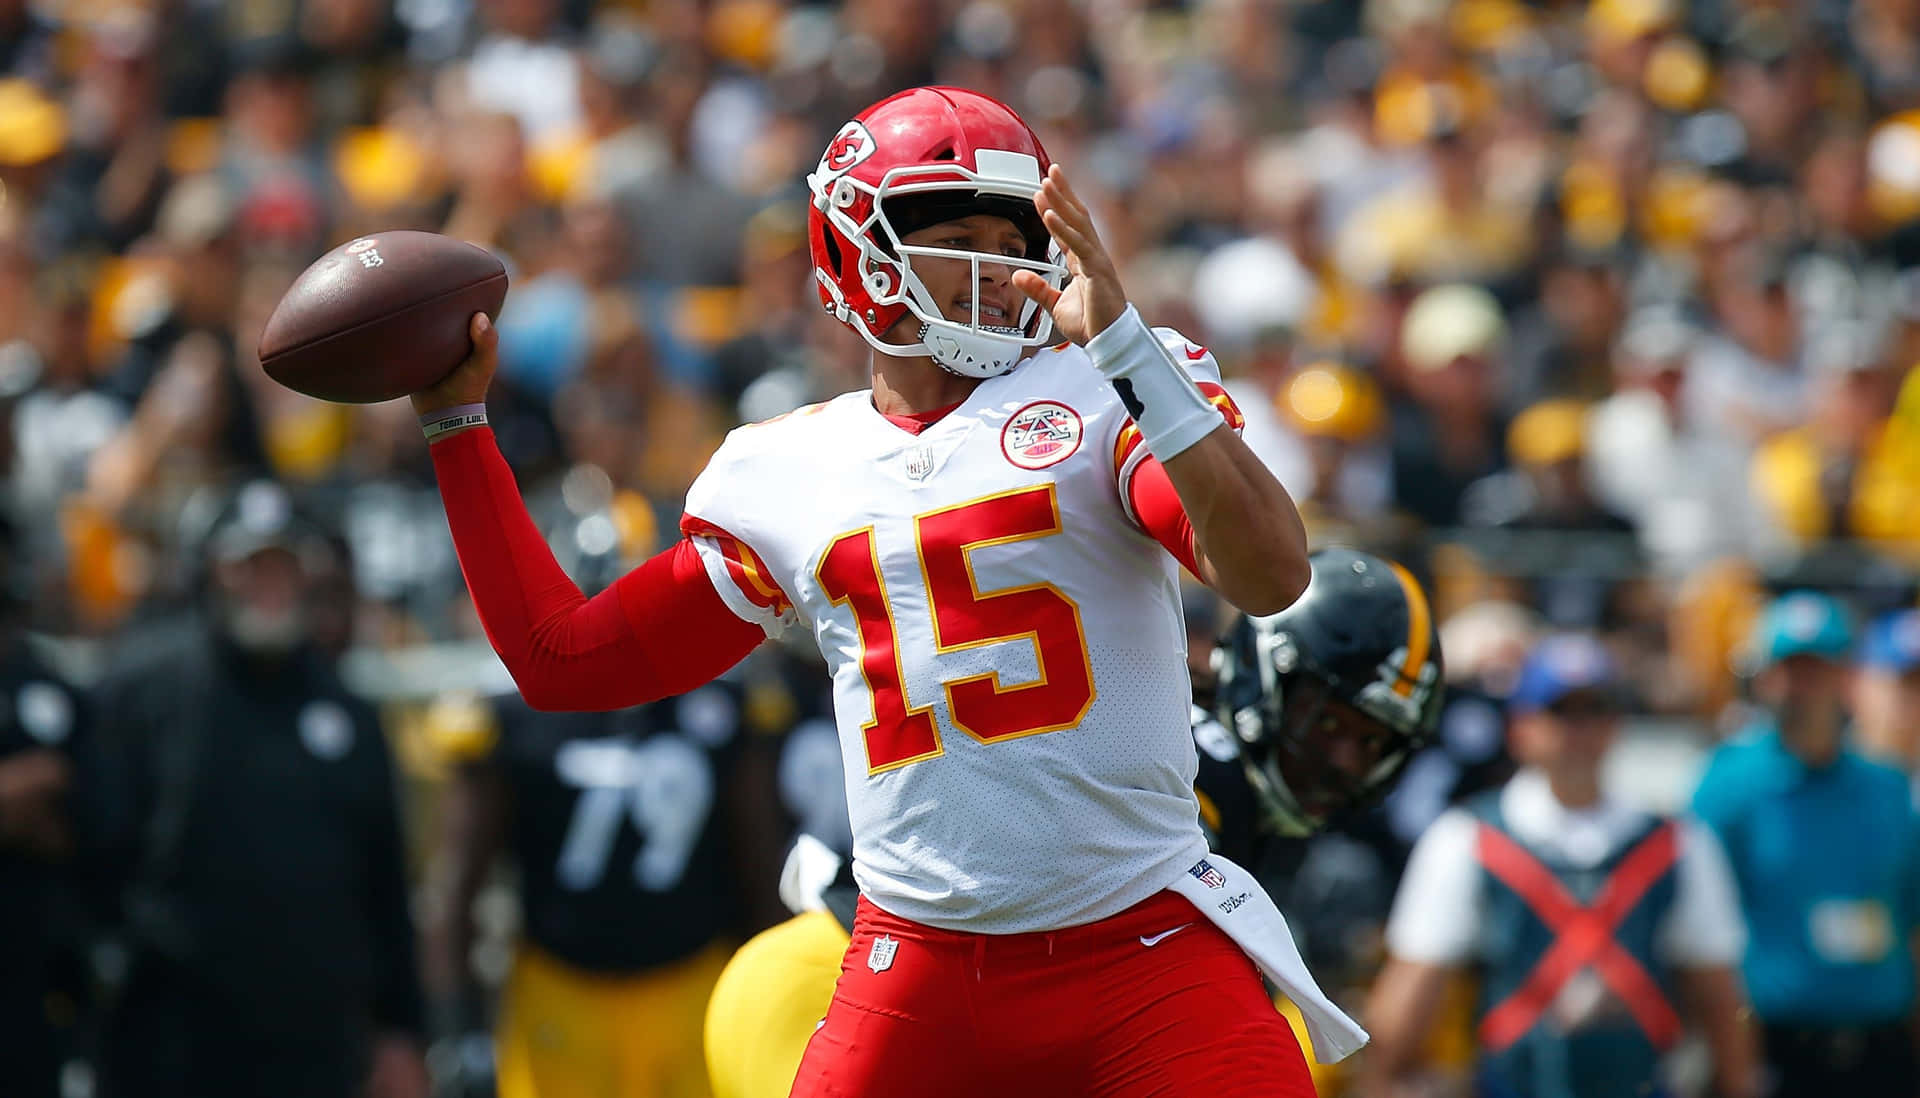 Patrick Mahomes in action on the field